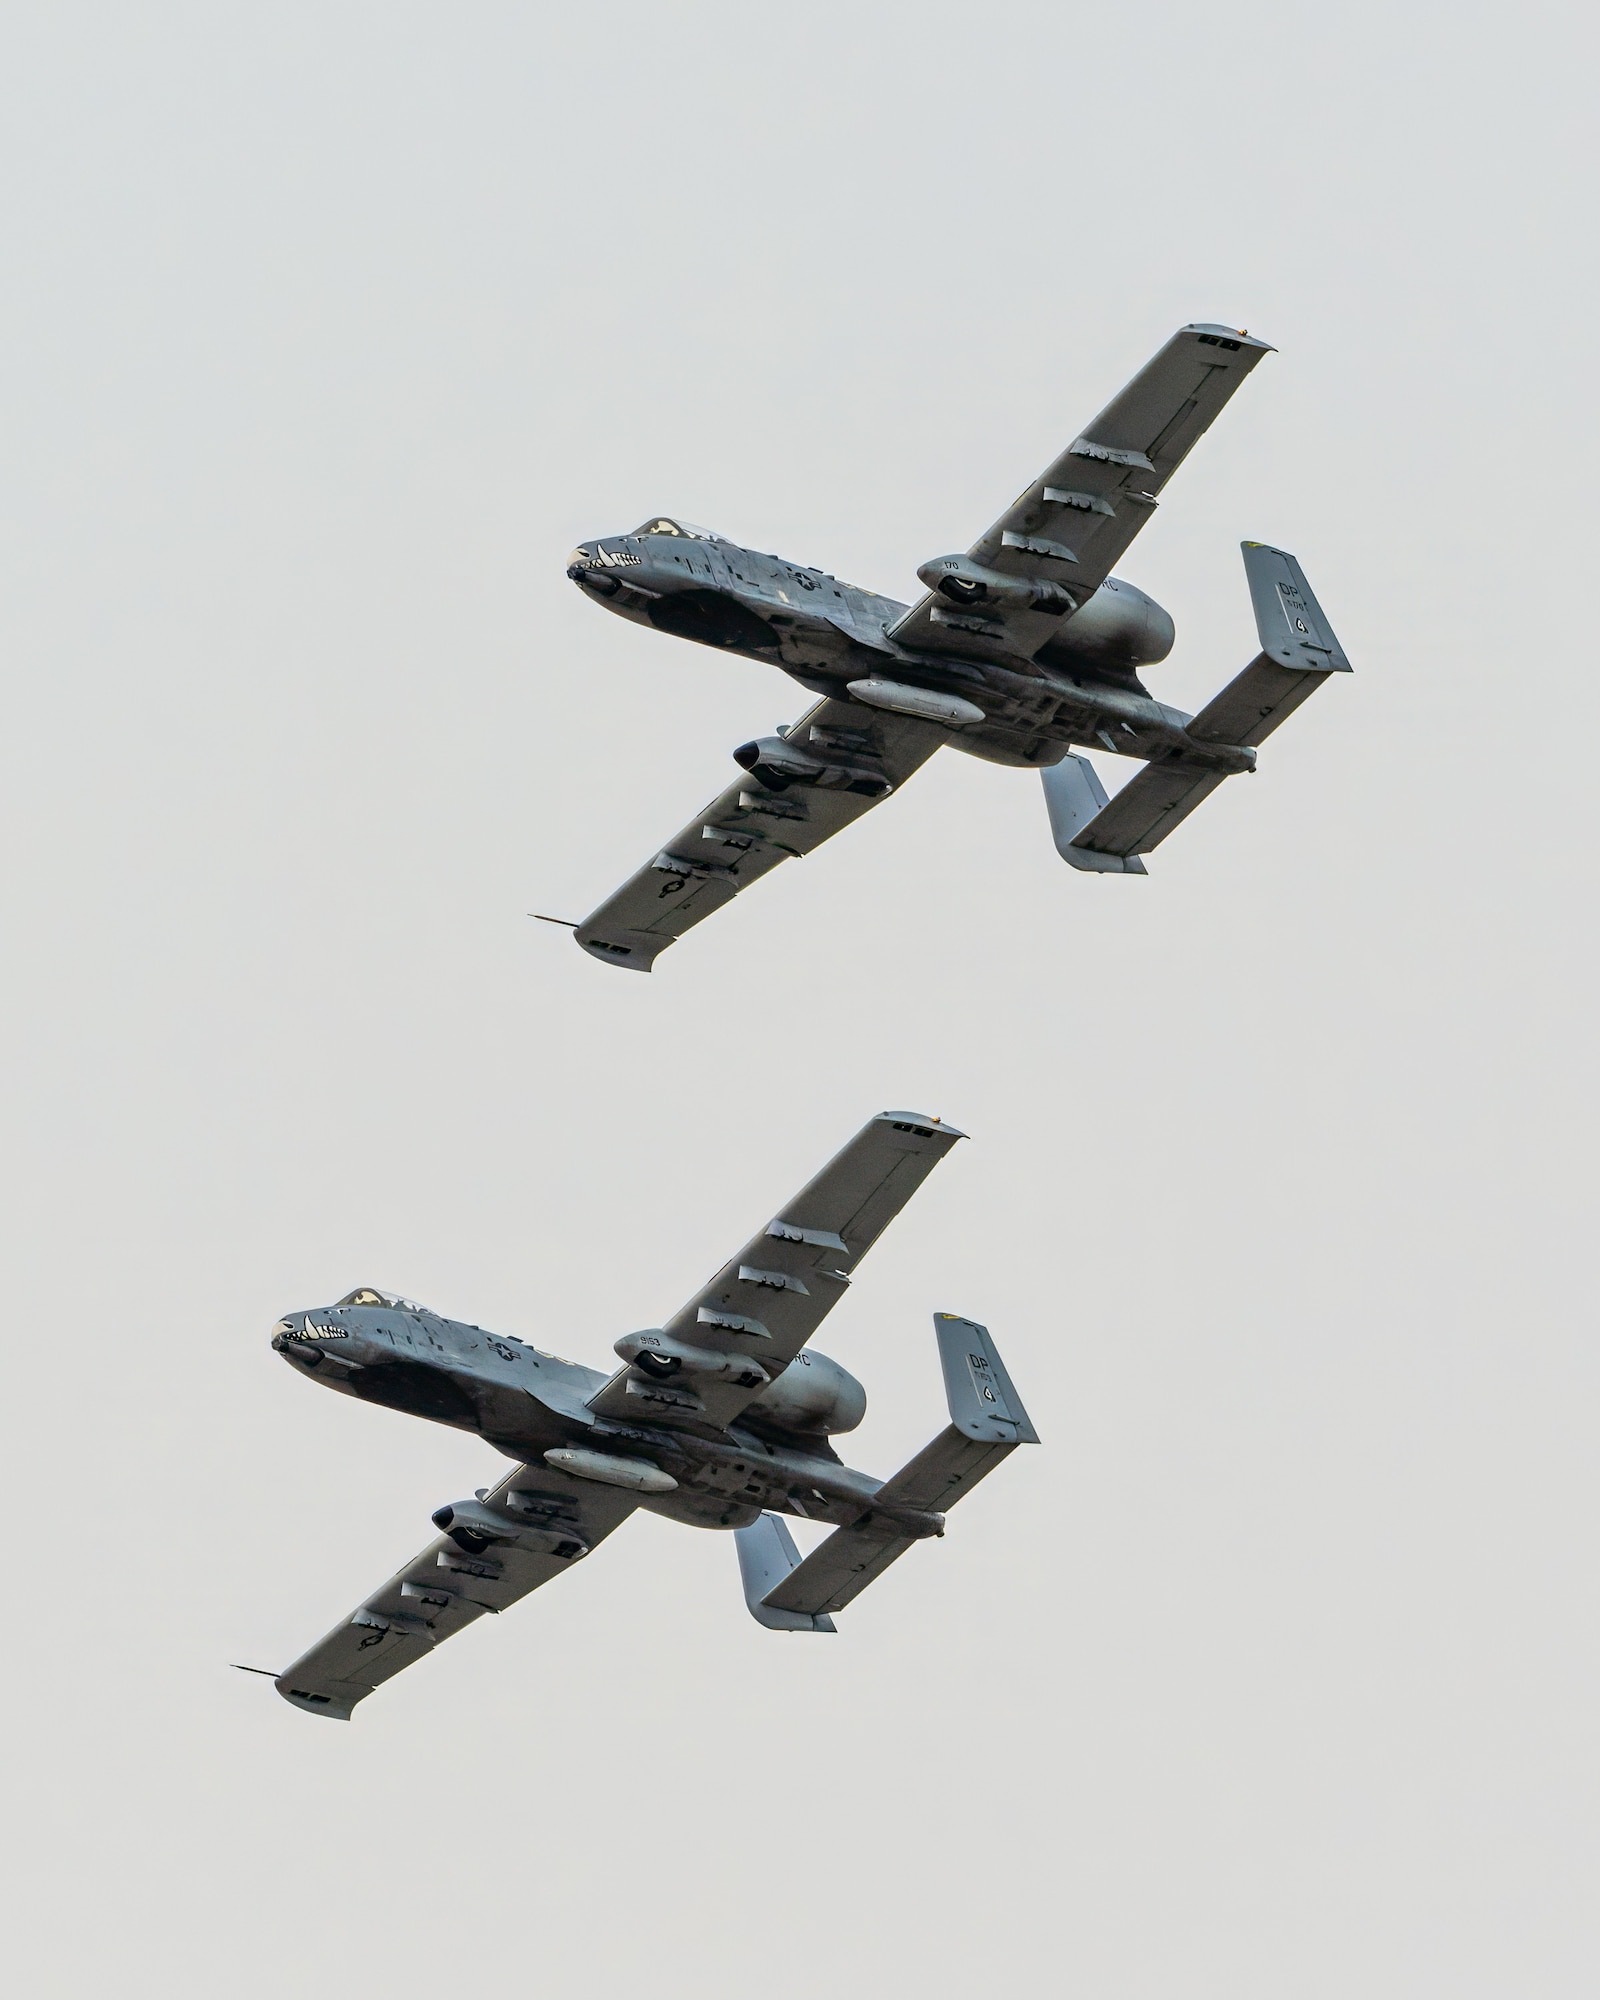 Two U.S. Air Force A-10 Thunderbolt II aircraft from 924th Fighter Group at Davis-Monthan Air Force Base, Ariz., perform an aerobatic display during the Thunder Over Louisville air show in Louisville, Ky., April 20, 2024. This year’s event featured more than two-dozen military and civilian planes, including the Kentucky Air National Guard’s C130J Super Hercules. (U.S. Air National Guard photo by Dale Greer)